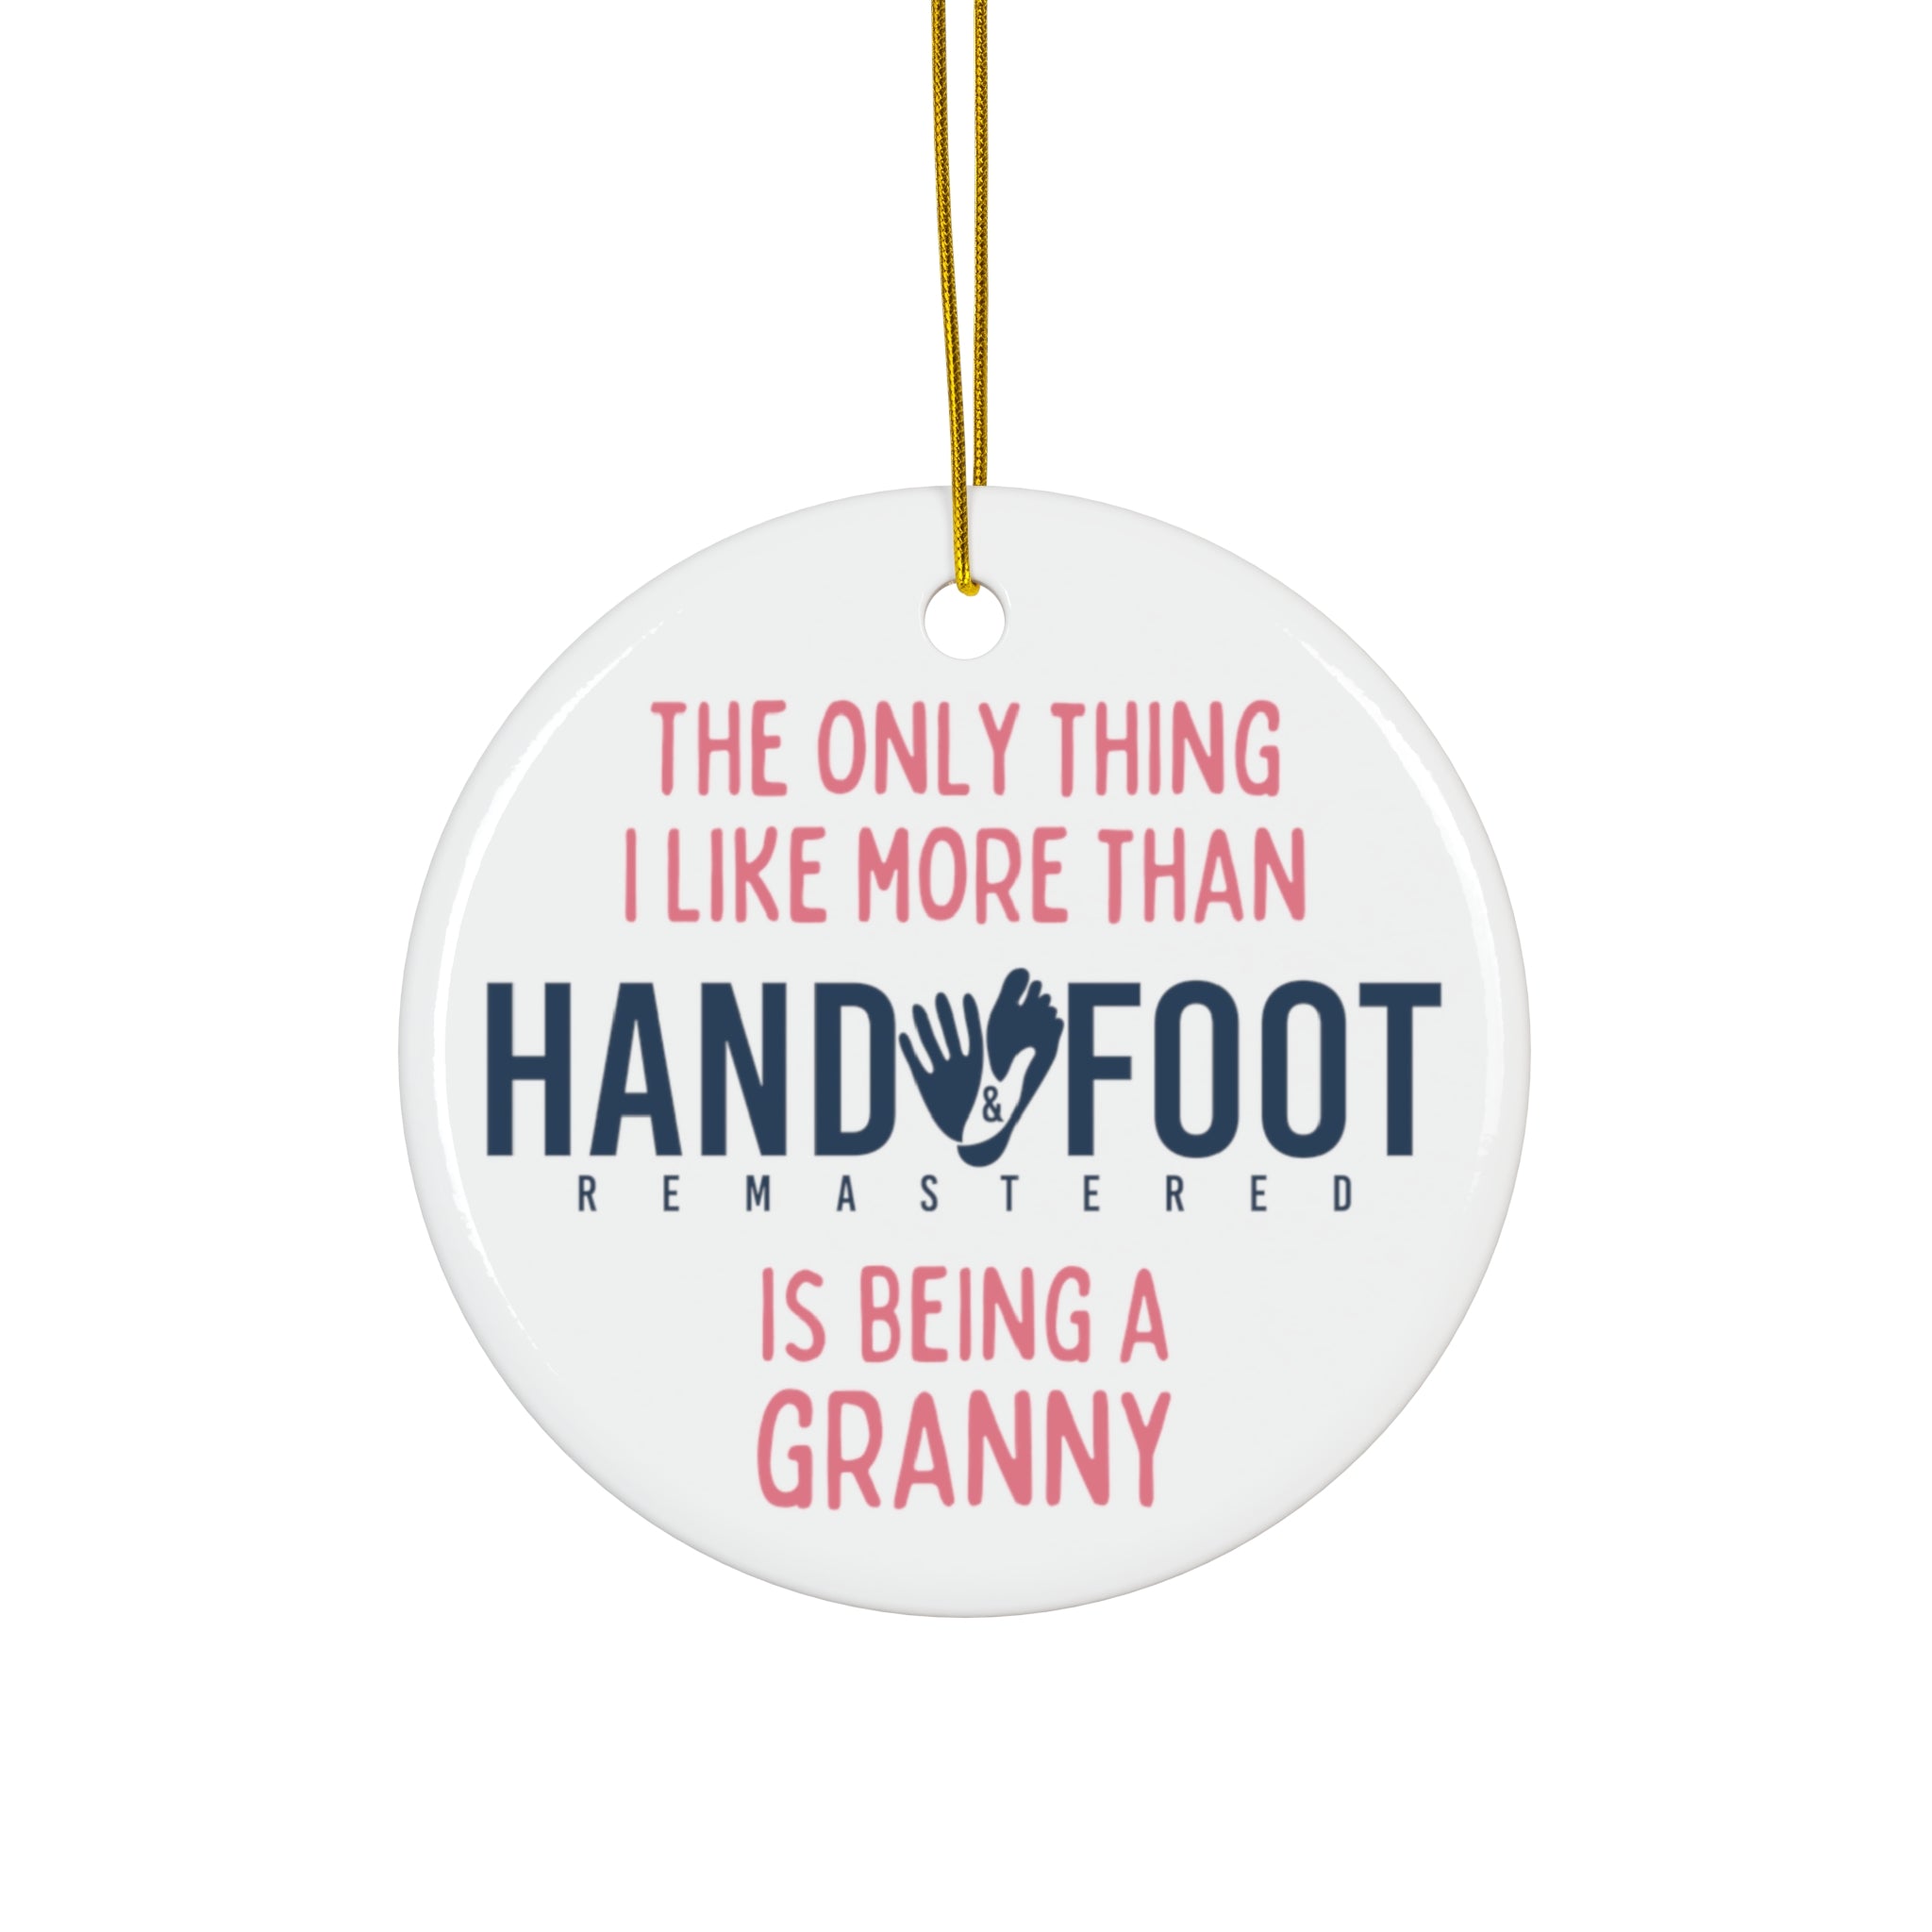 Being a Granny Ceramic Ornament, 3 Shapes